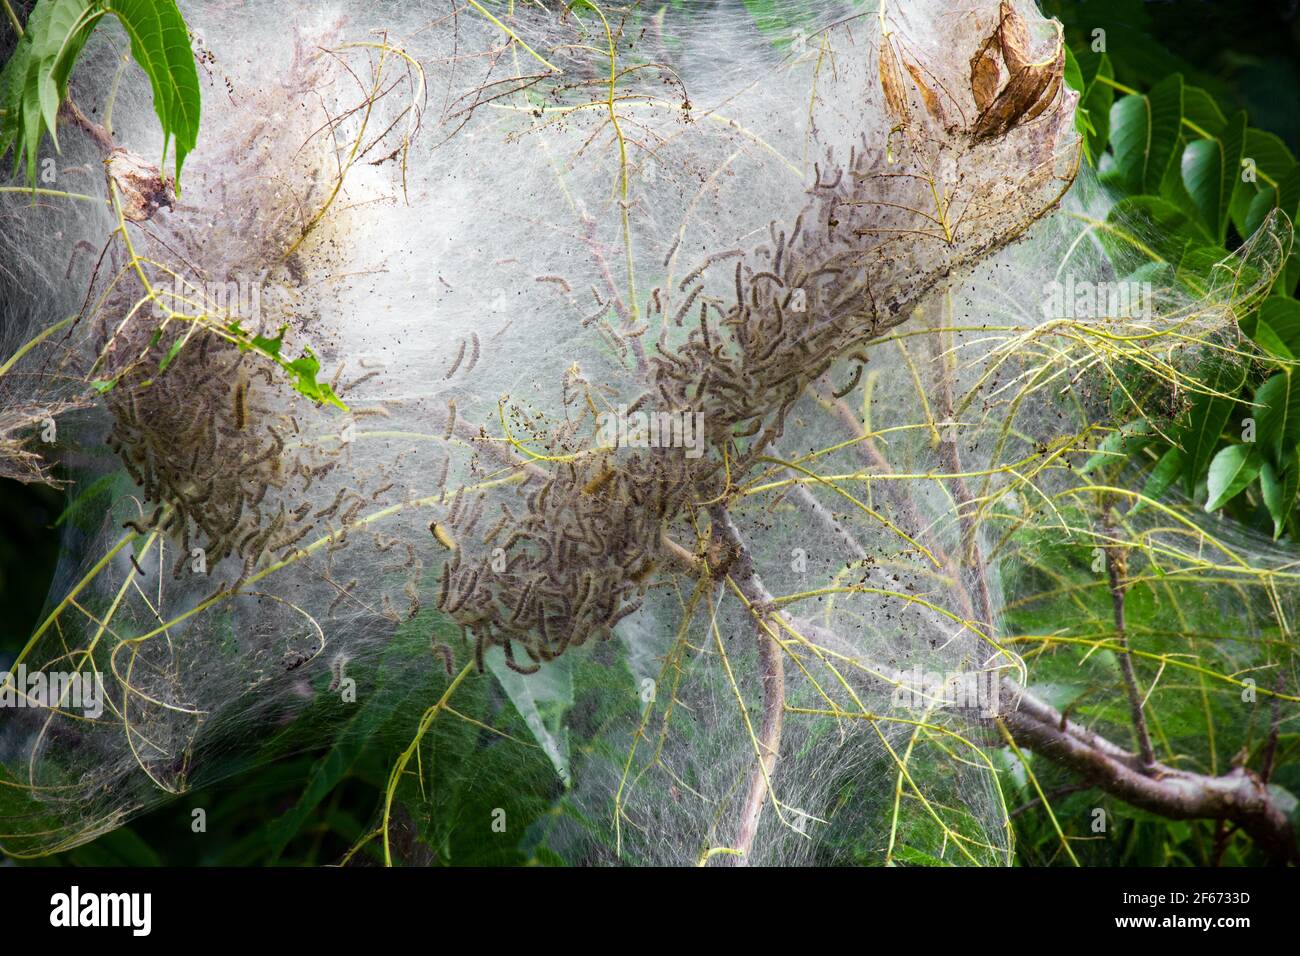 The web of Fall Webworm on the branches of a Black Walnut tree in Pennsylvania's Pocono Mountains. Stock Photo